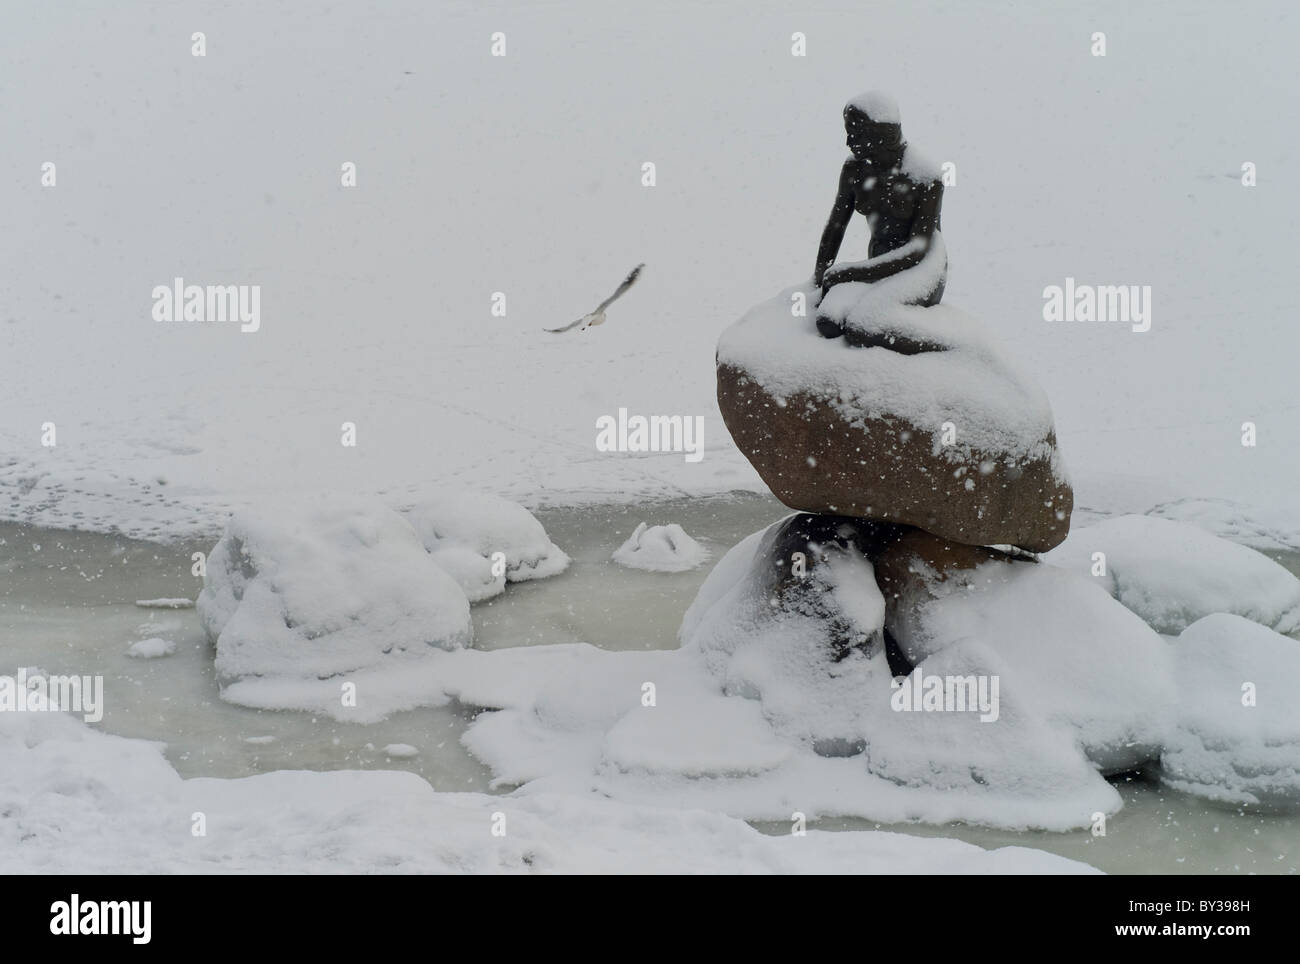 The Little Mermaid  bronze statue in Copenhagen, Denmark in winter, surrounded by ice and snow at Christmas time Stock Photo